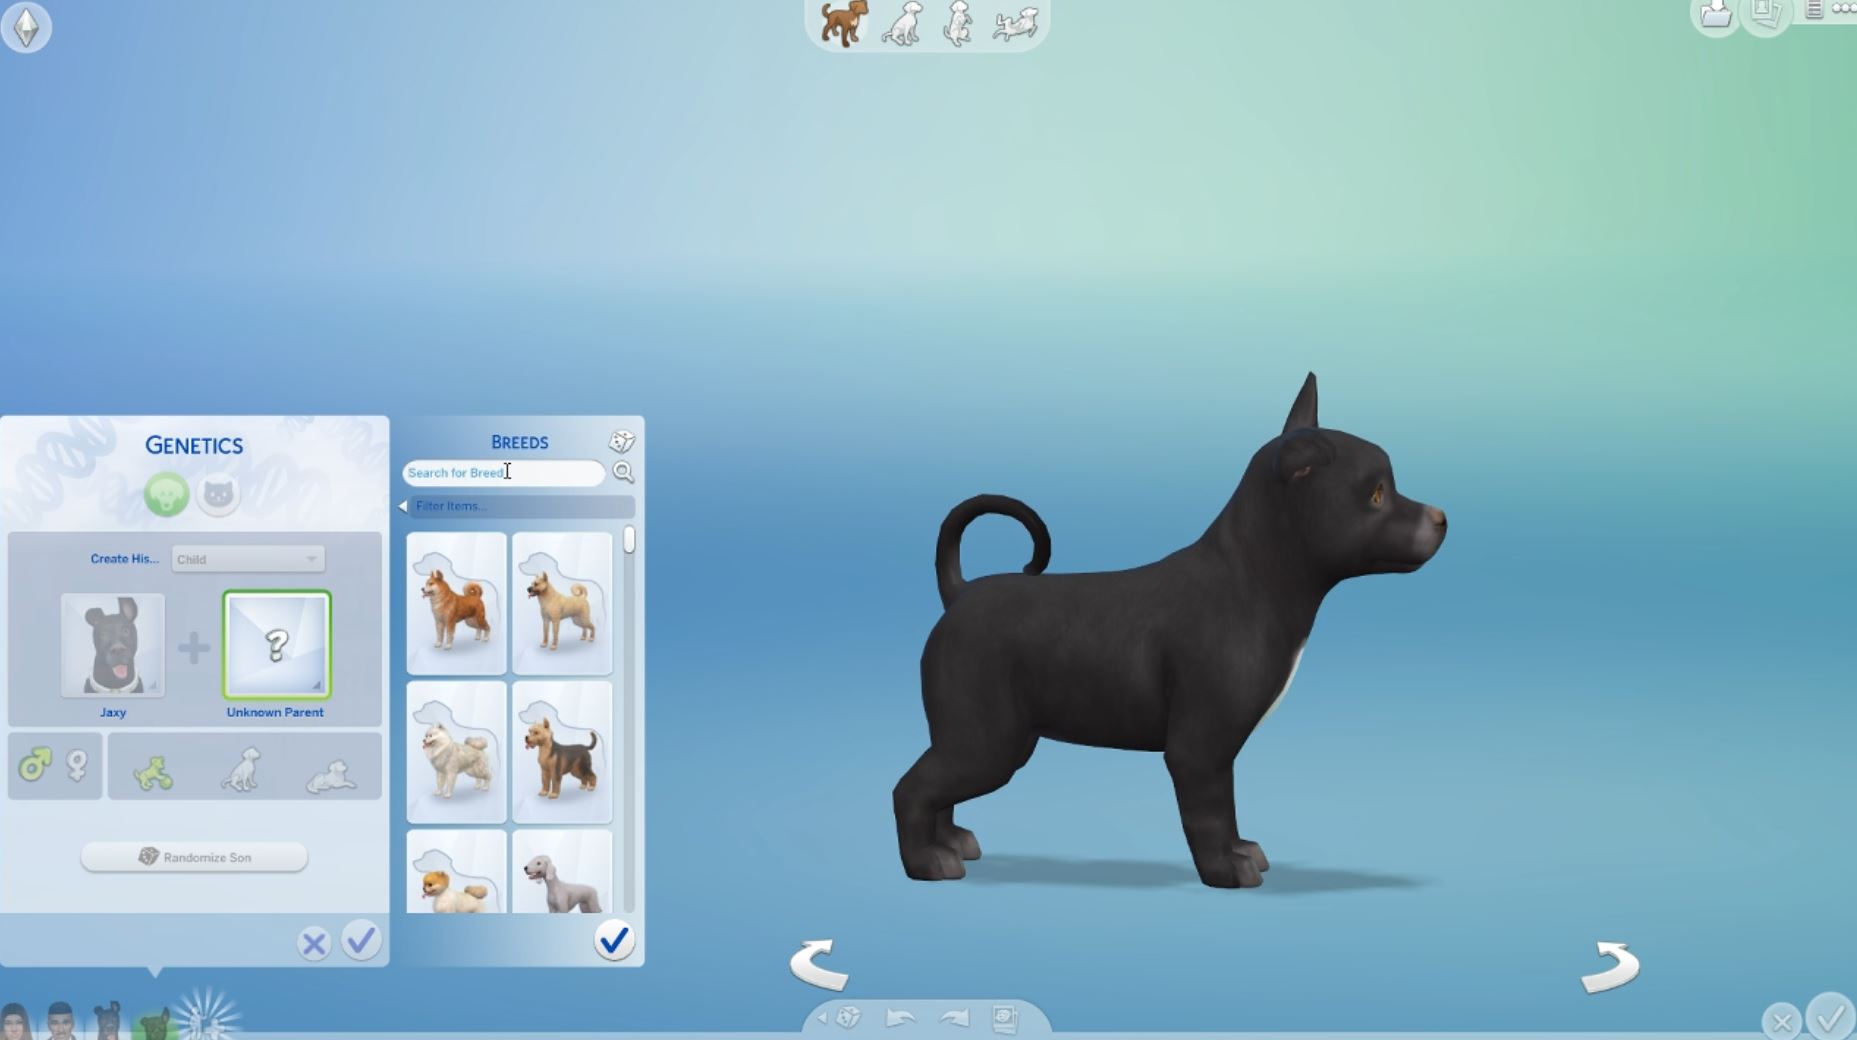 arkiv Harden materiale The Sims 4 Cats & Dogs: 45 Create-a-Pet Screenshots! (HQ) | SimsVIP